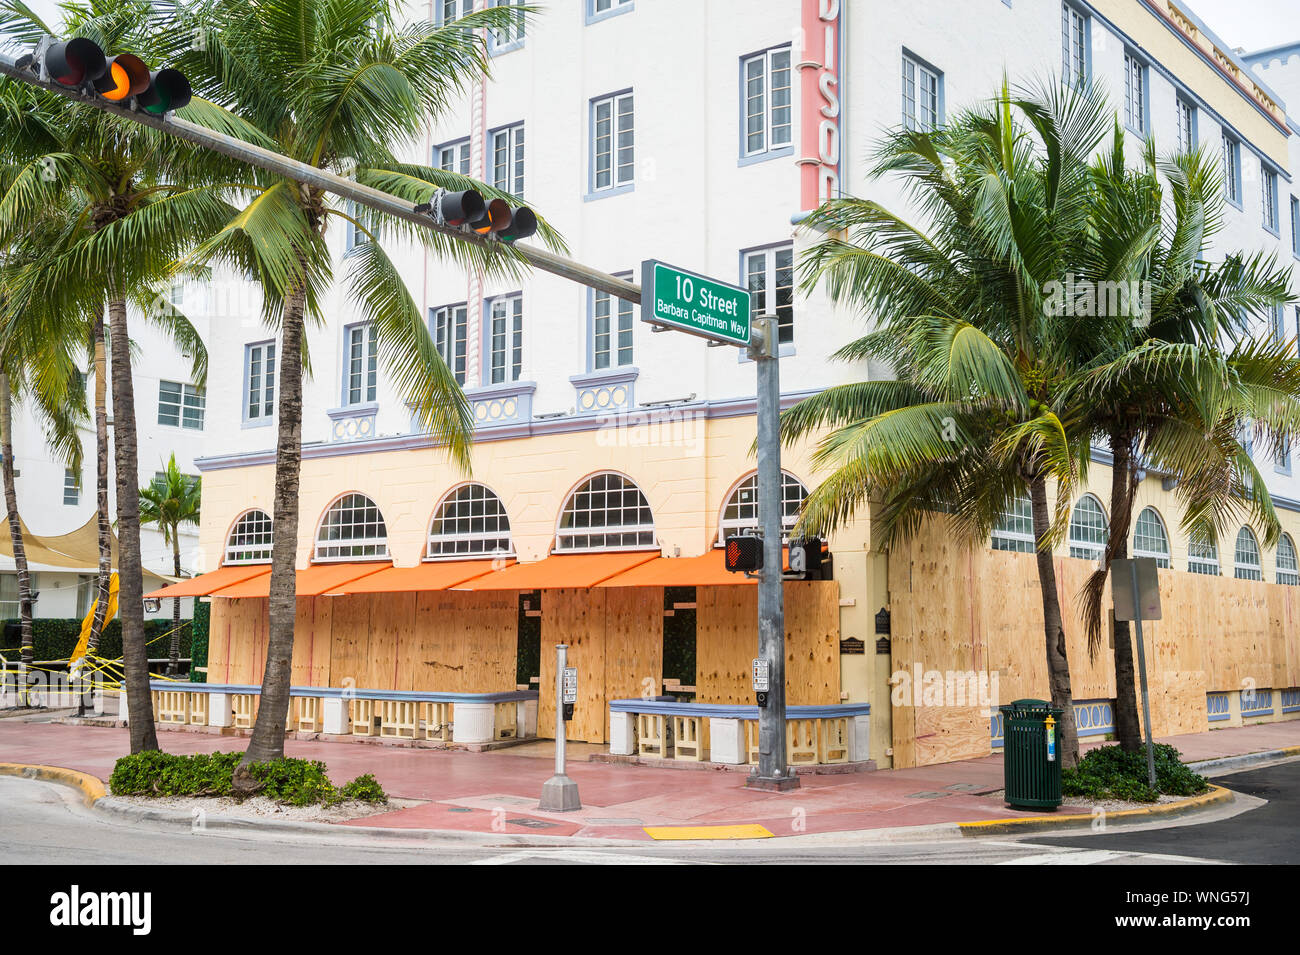 MIAMI - SEPTEMBER 3, 2019: Businesses on Ocean Drive remain boarded up after the threat of Hurricane Dorian disrupted Labor Day celebrations. Stock Photo